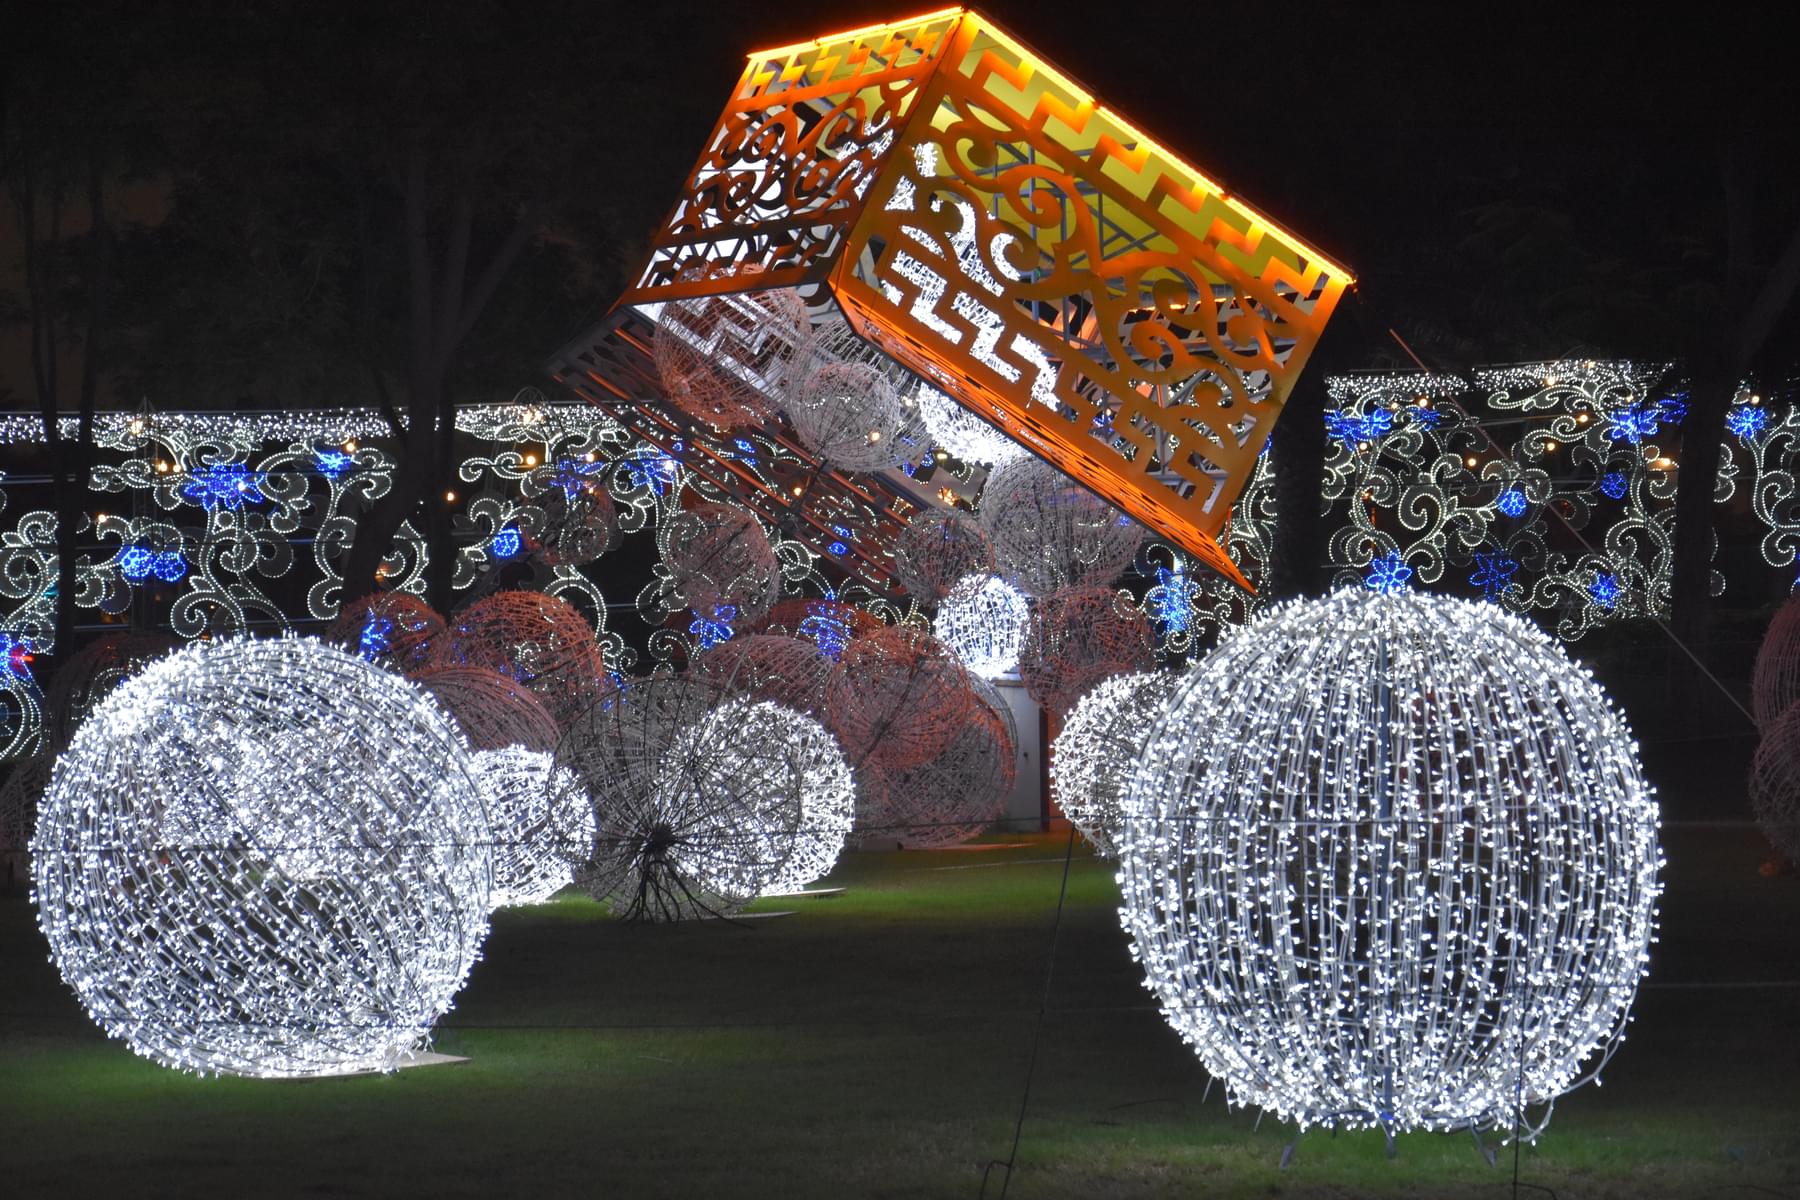 Admire the beauty of the decorative lights and shapes all around the garden